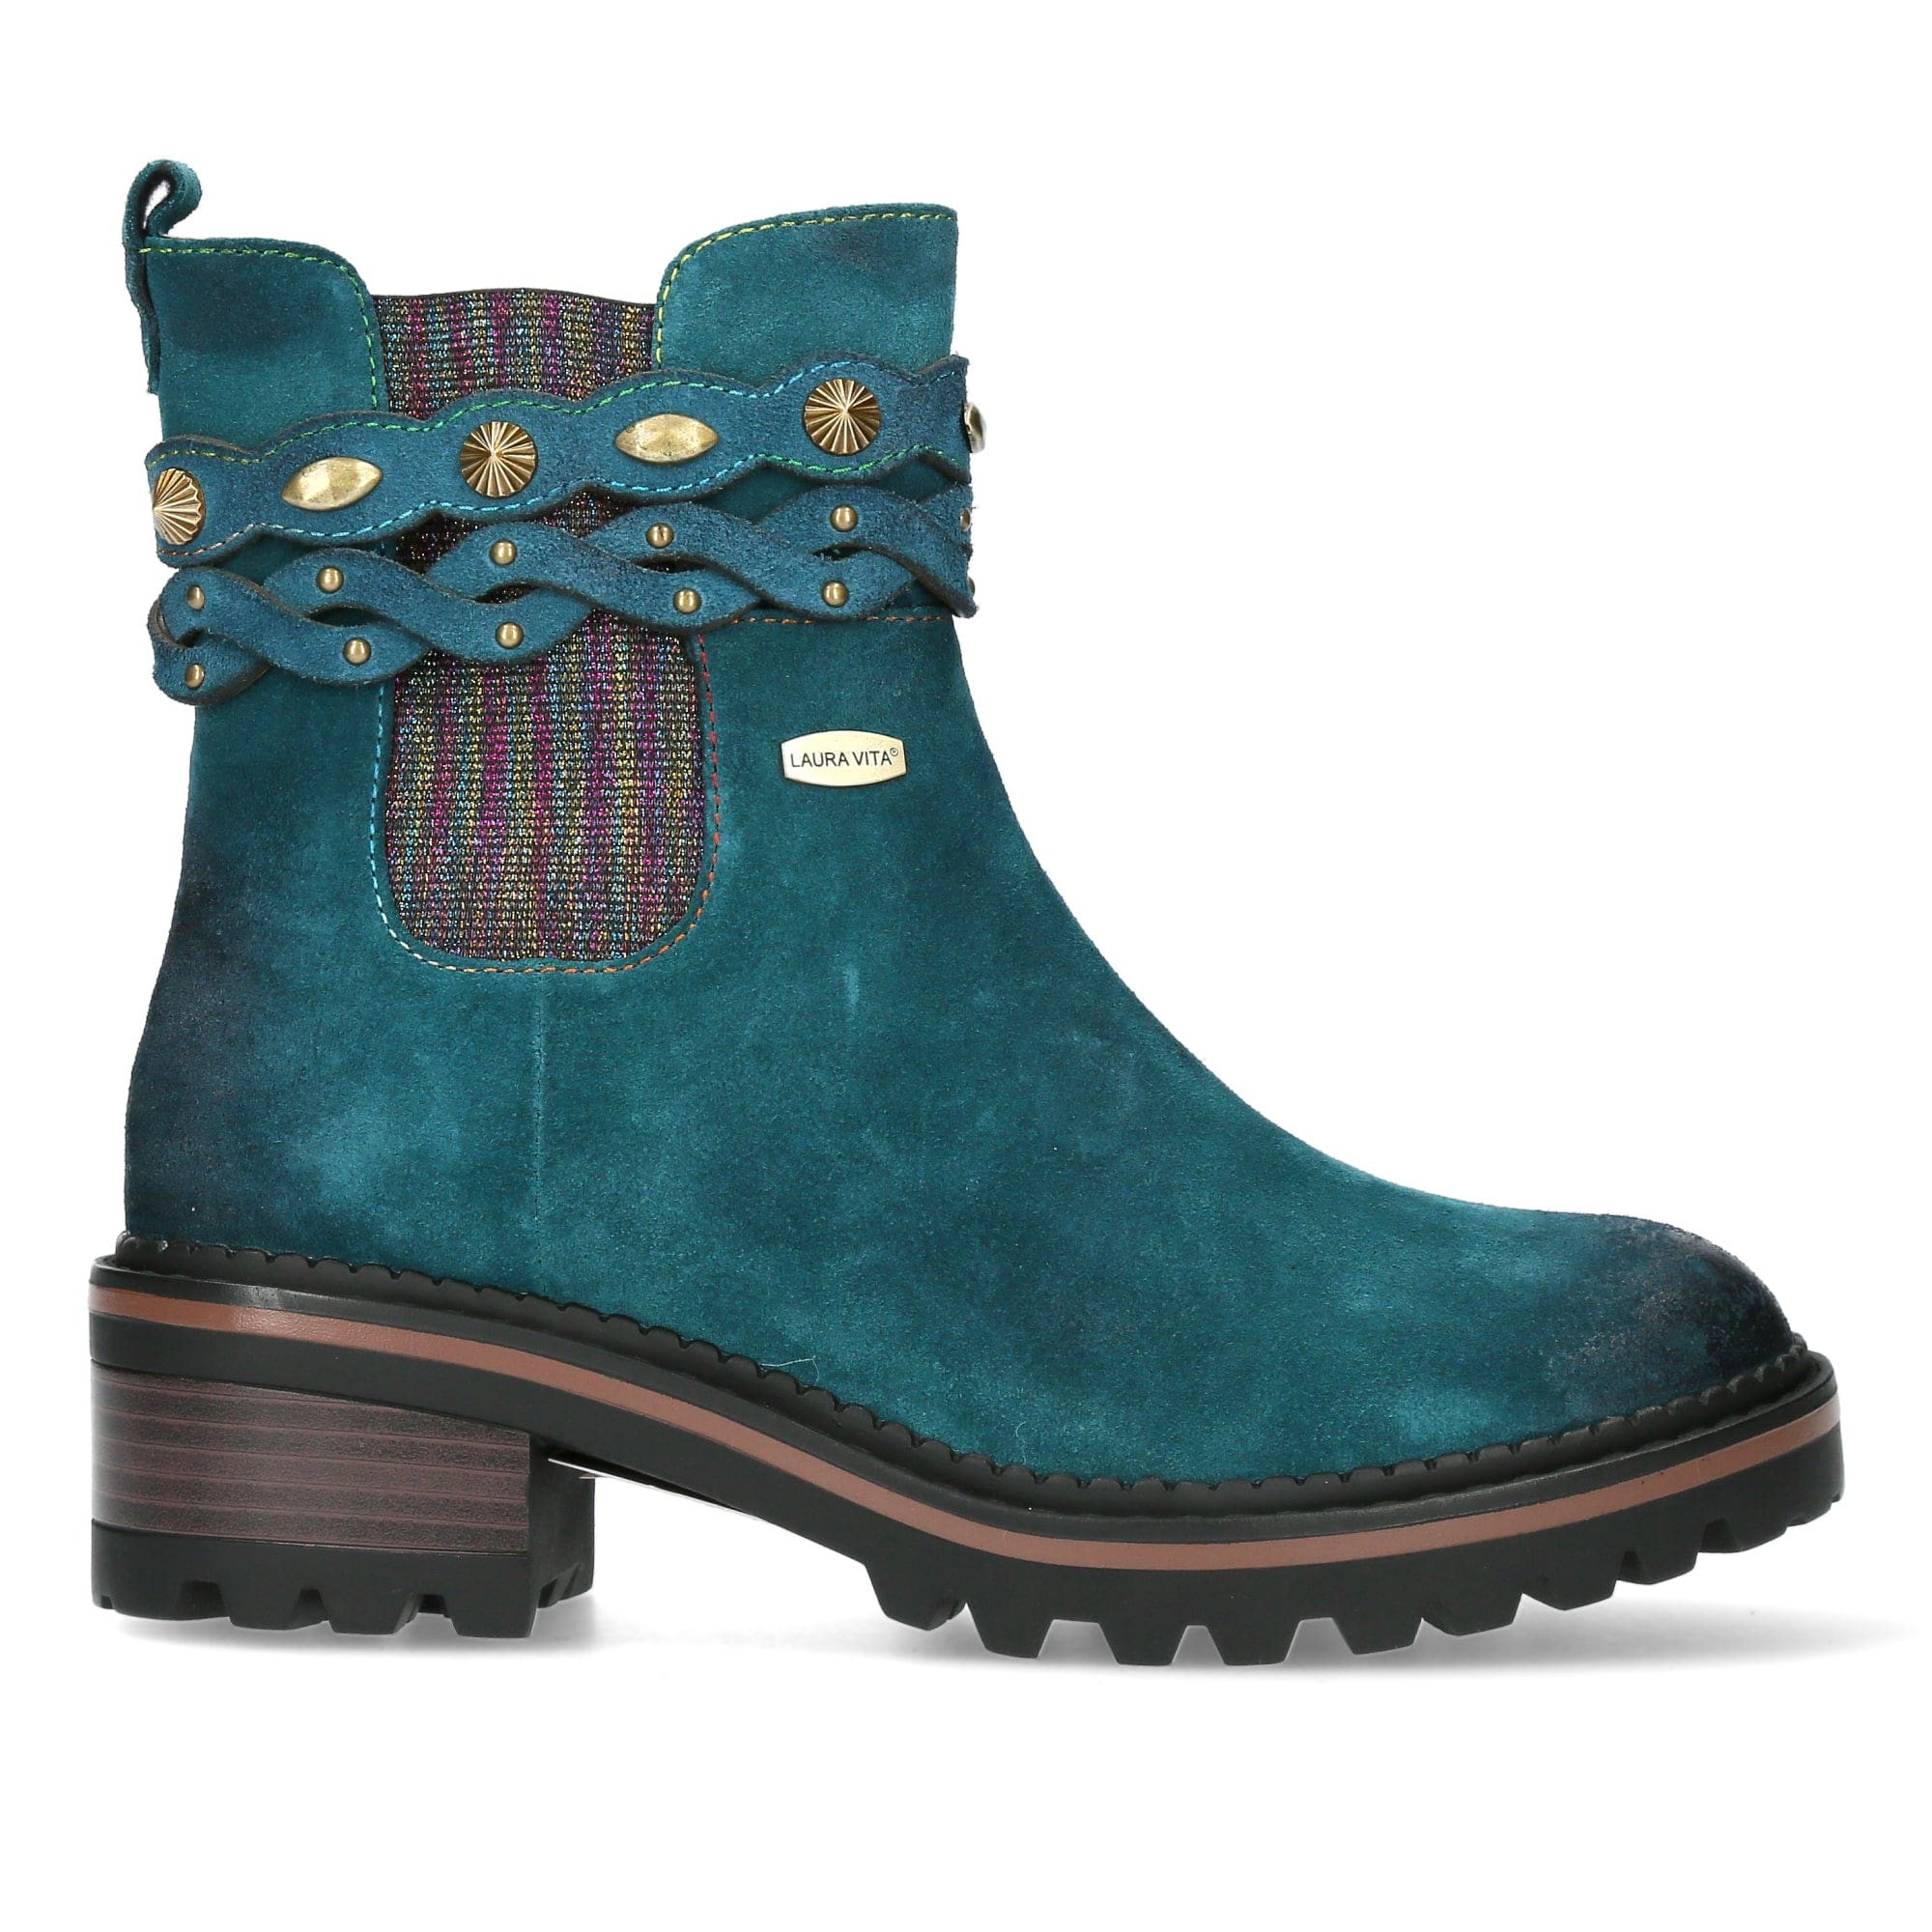 KESSO 03 - 35 / Turquoise - Boots